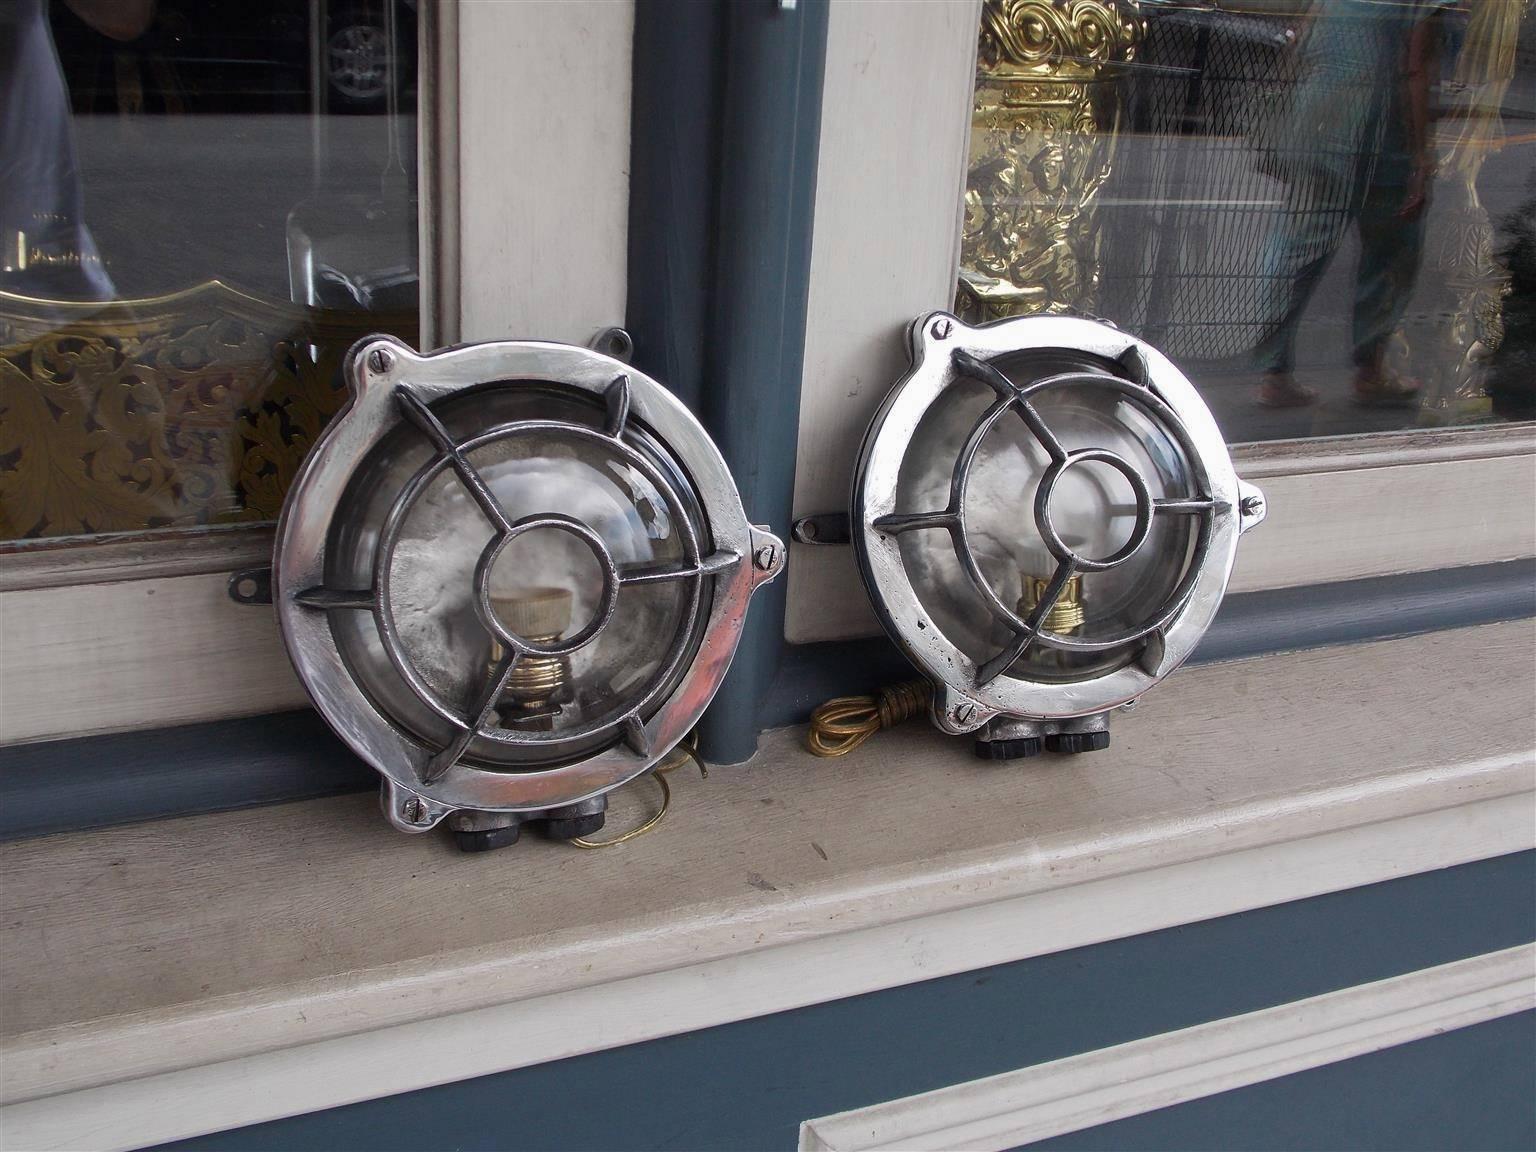 Pair of American polished aluminum bulls eye nautical wall lights with protective front cages and rear mounting brackets. Pair has been electrified with a single socket for bulb, 20th century.